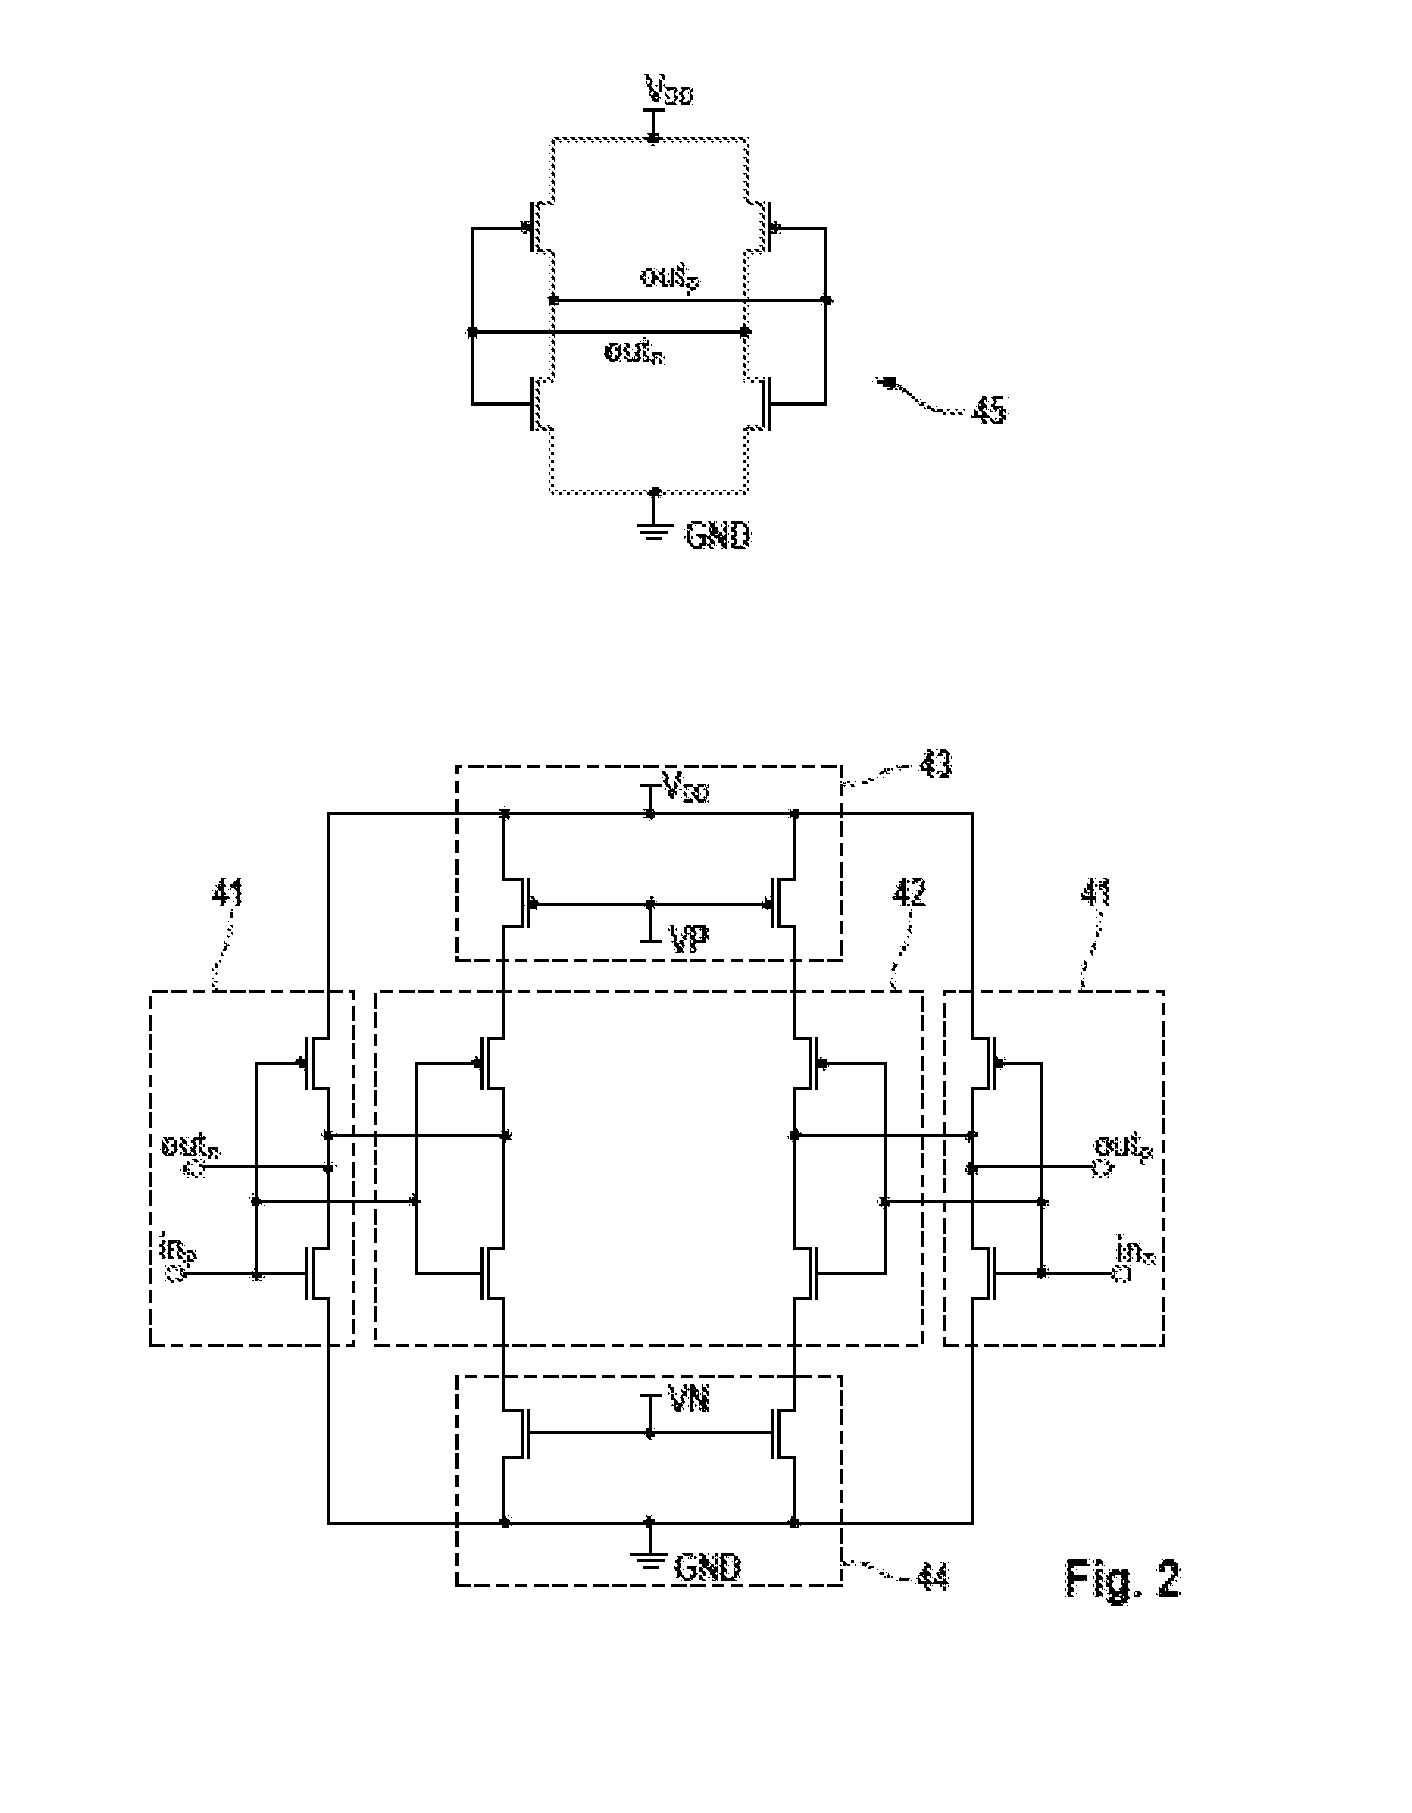 Voltage-controlled ring oscillator with delay line